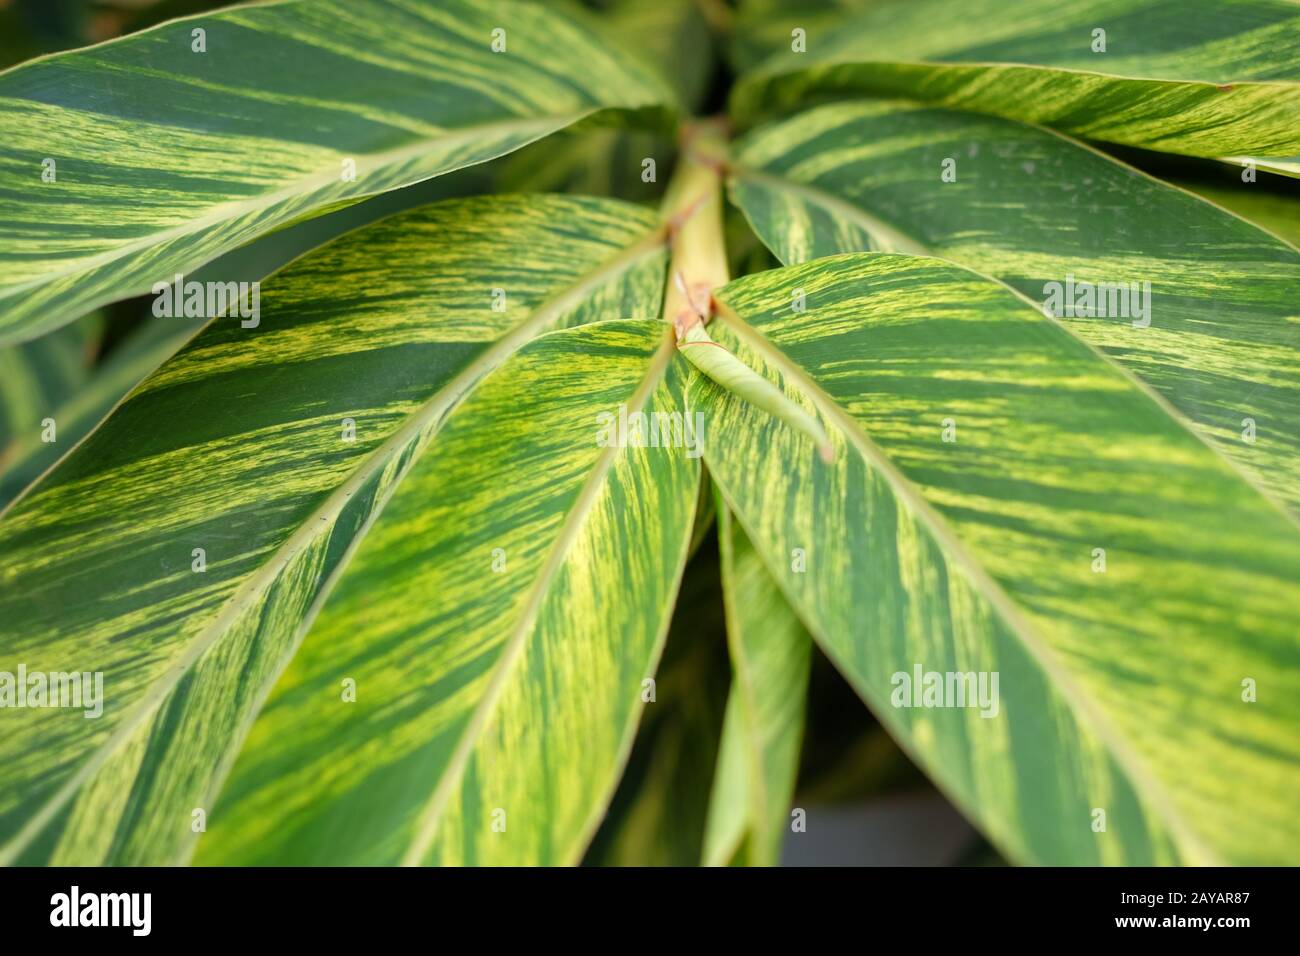 Graphic Floral Detail Of Green And Yellow Leaves Of Ginger Lily Hedychium Gardnerianum Stock Photo Alamy